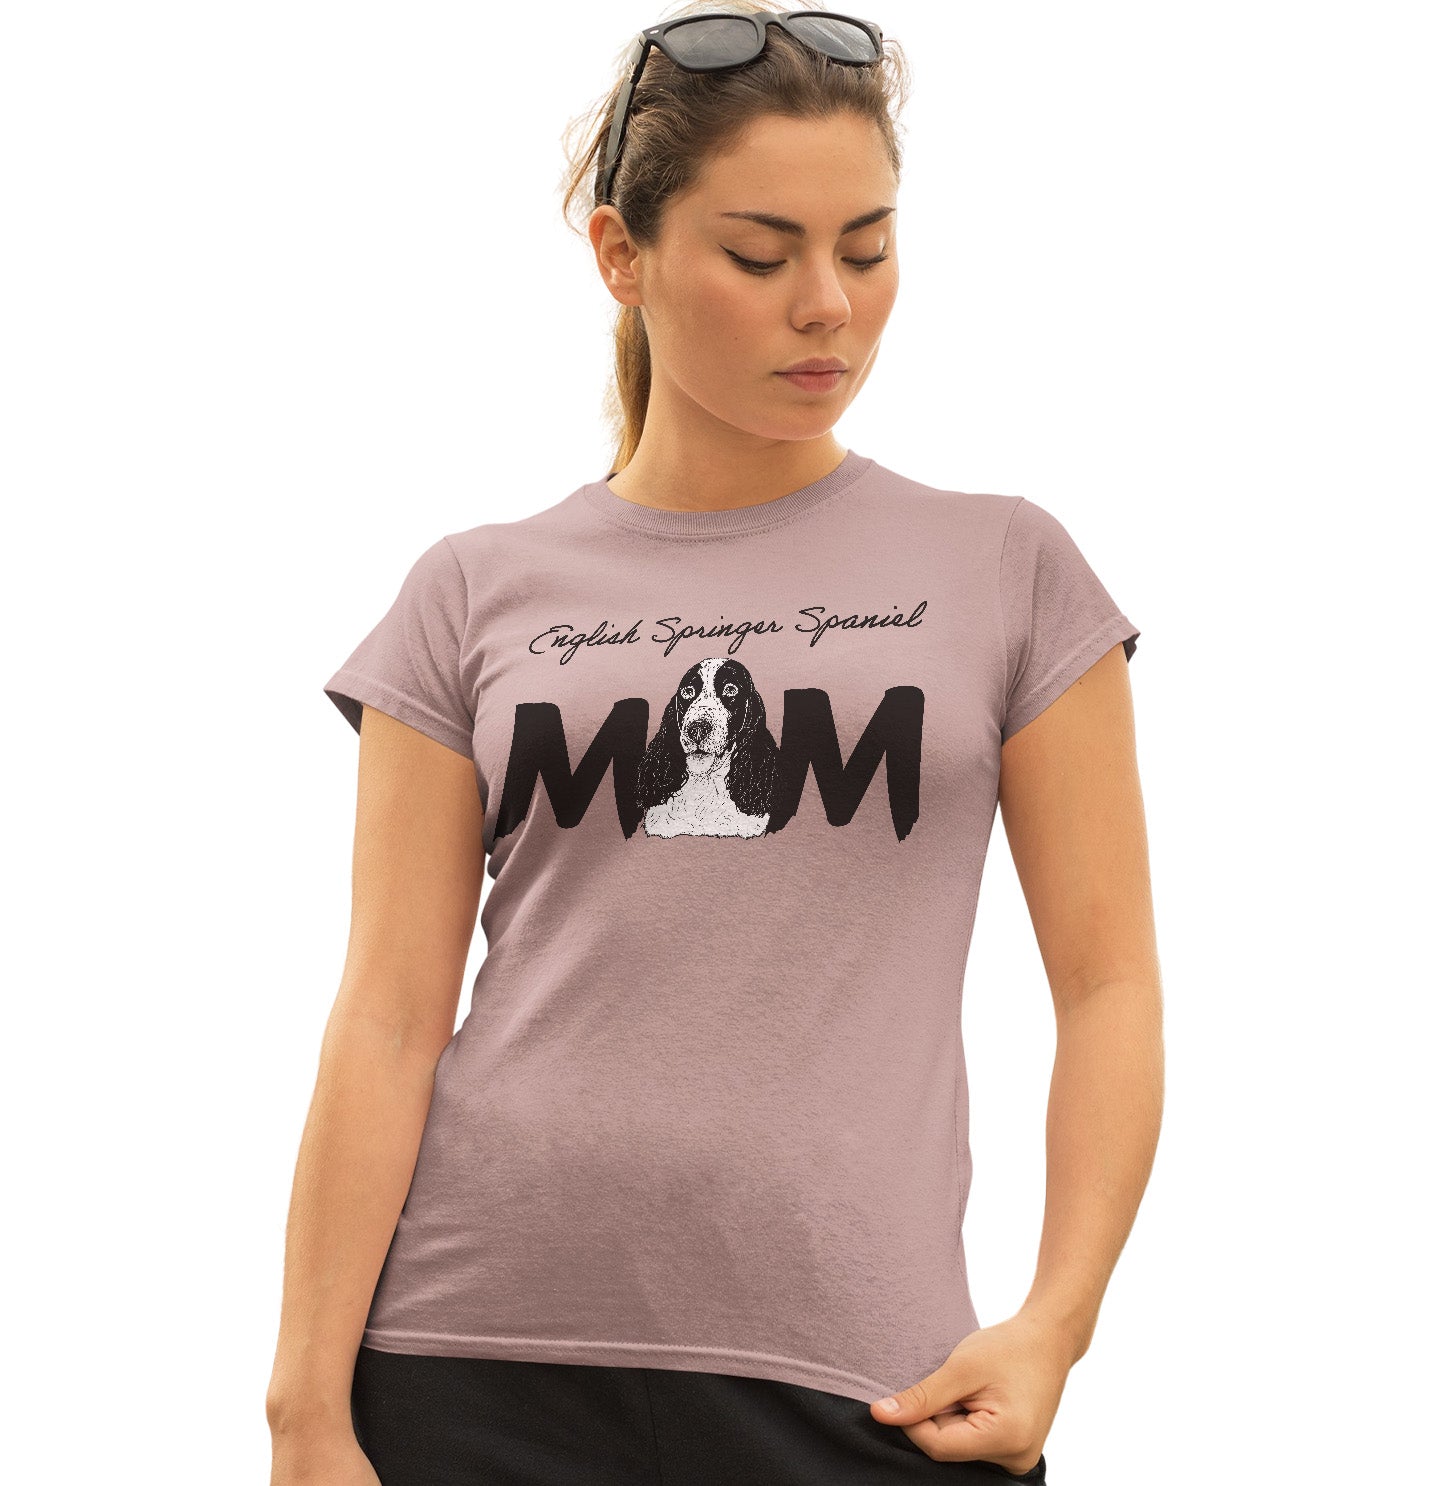 English Springer Spaniel Breed Mom - Women's Fitted T-Shirt